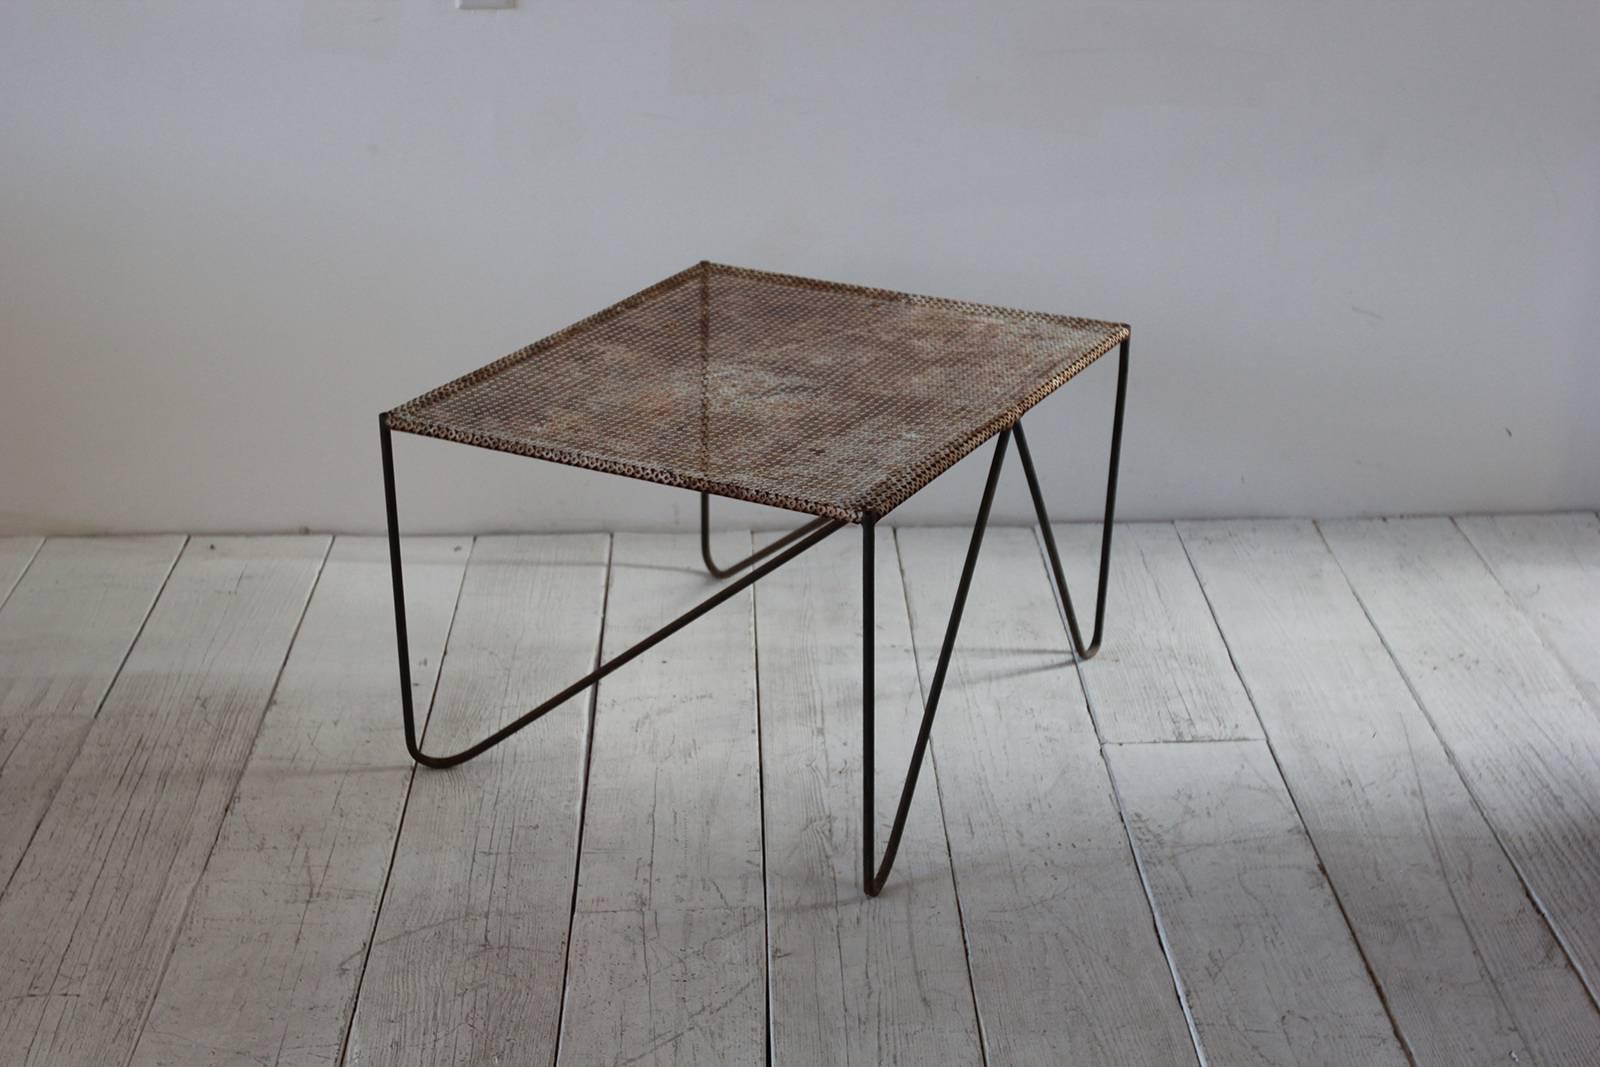 20th Century Rustic Perforated Metal Side Table with Angled Legs